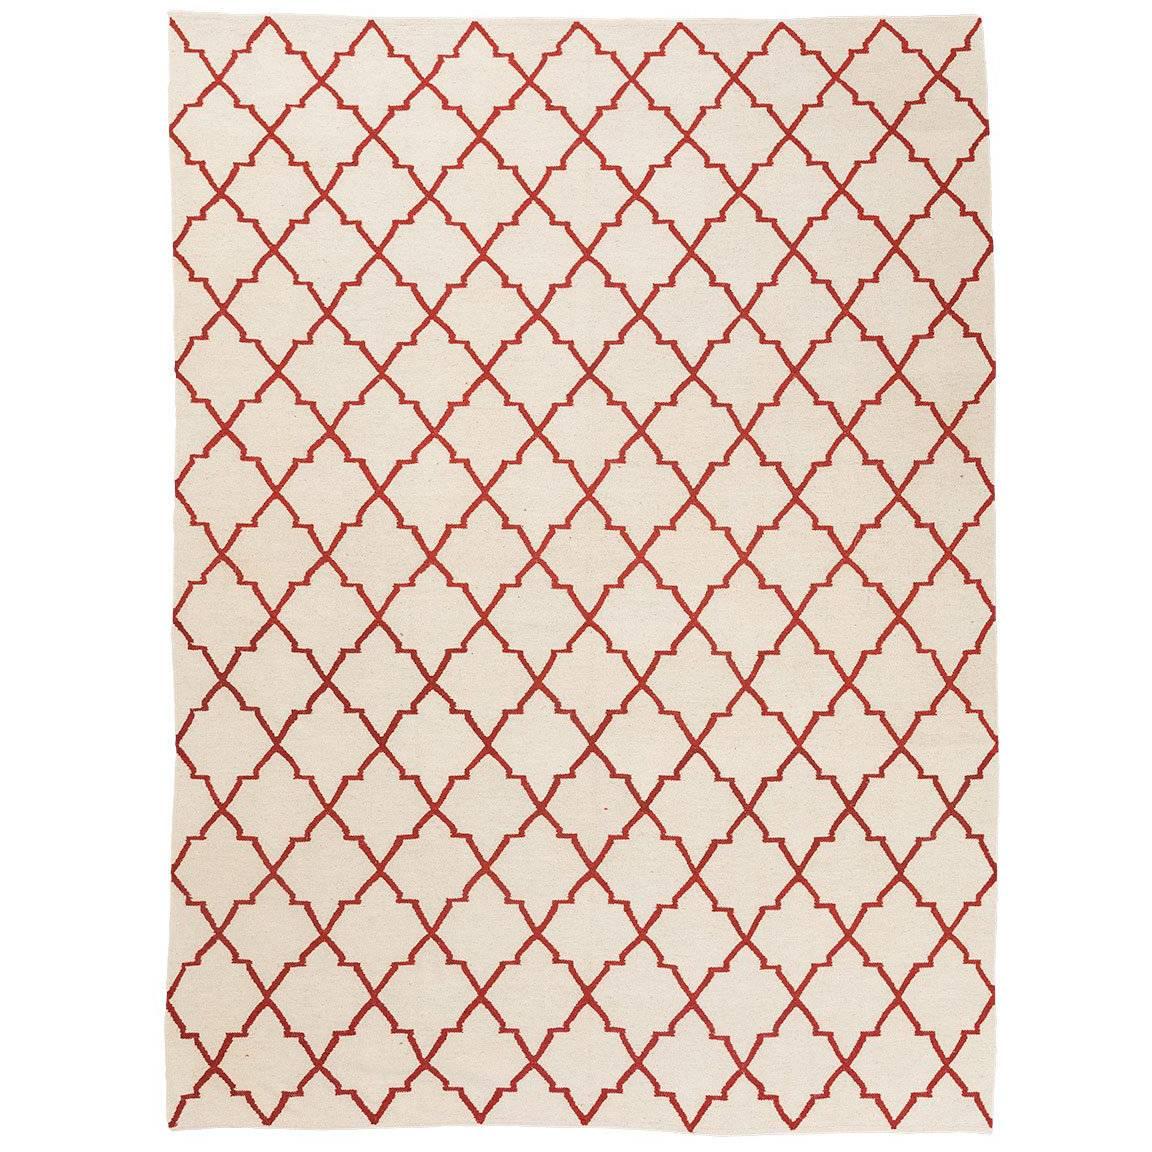 21st Century Contemporary Kilim, Geometric Design with Beige and Red Colors